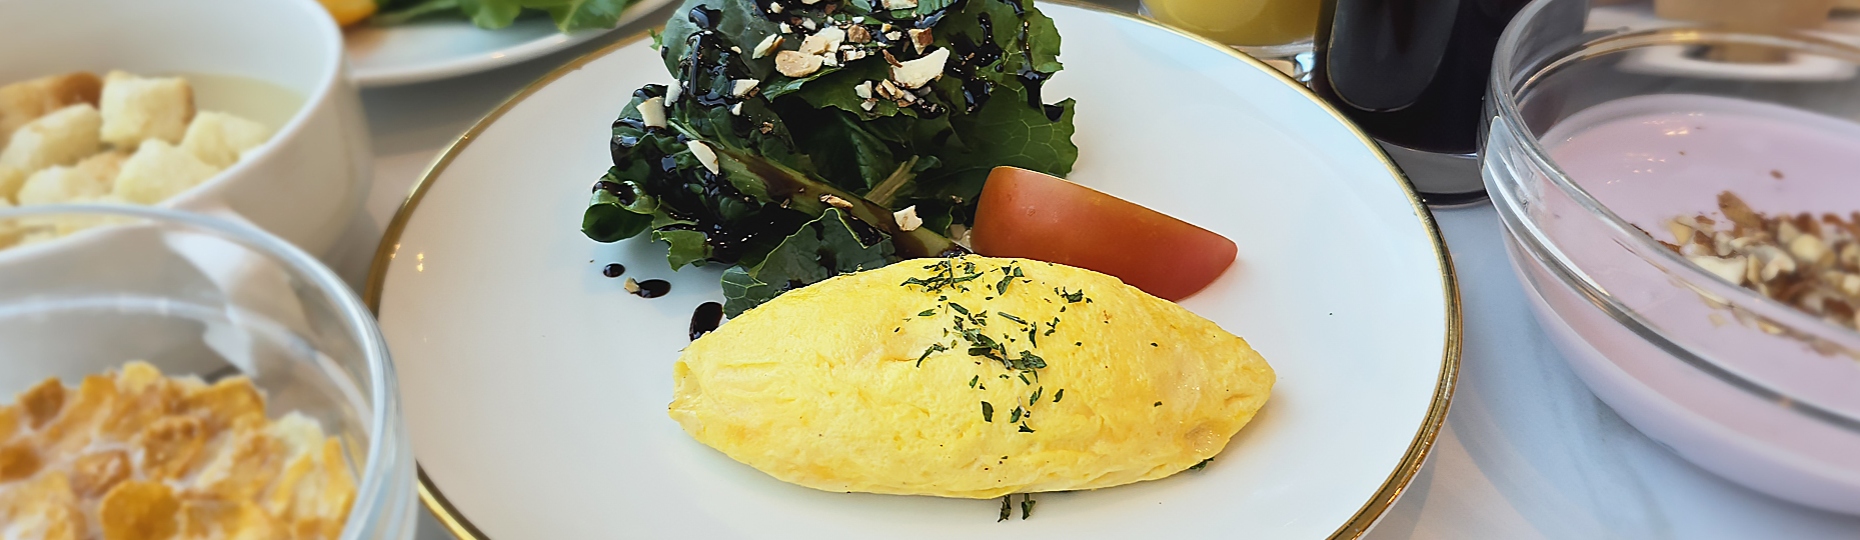 Freshly Made Omelets at the Live Kitchen